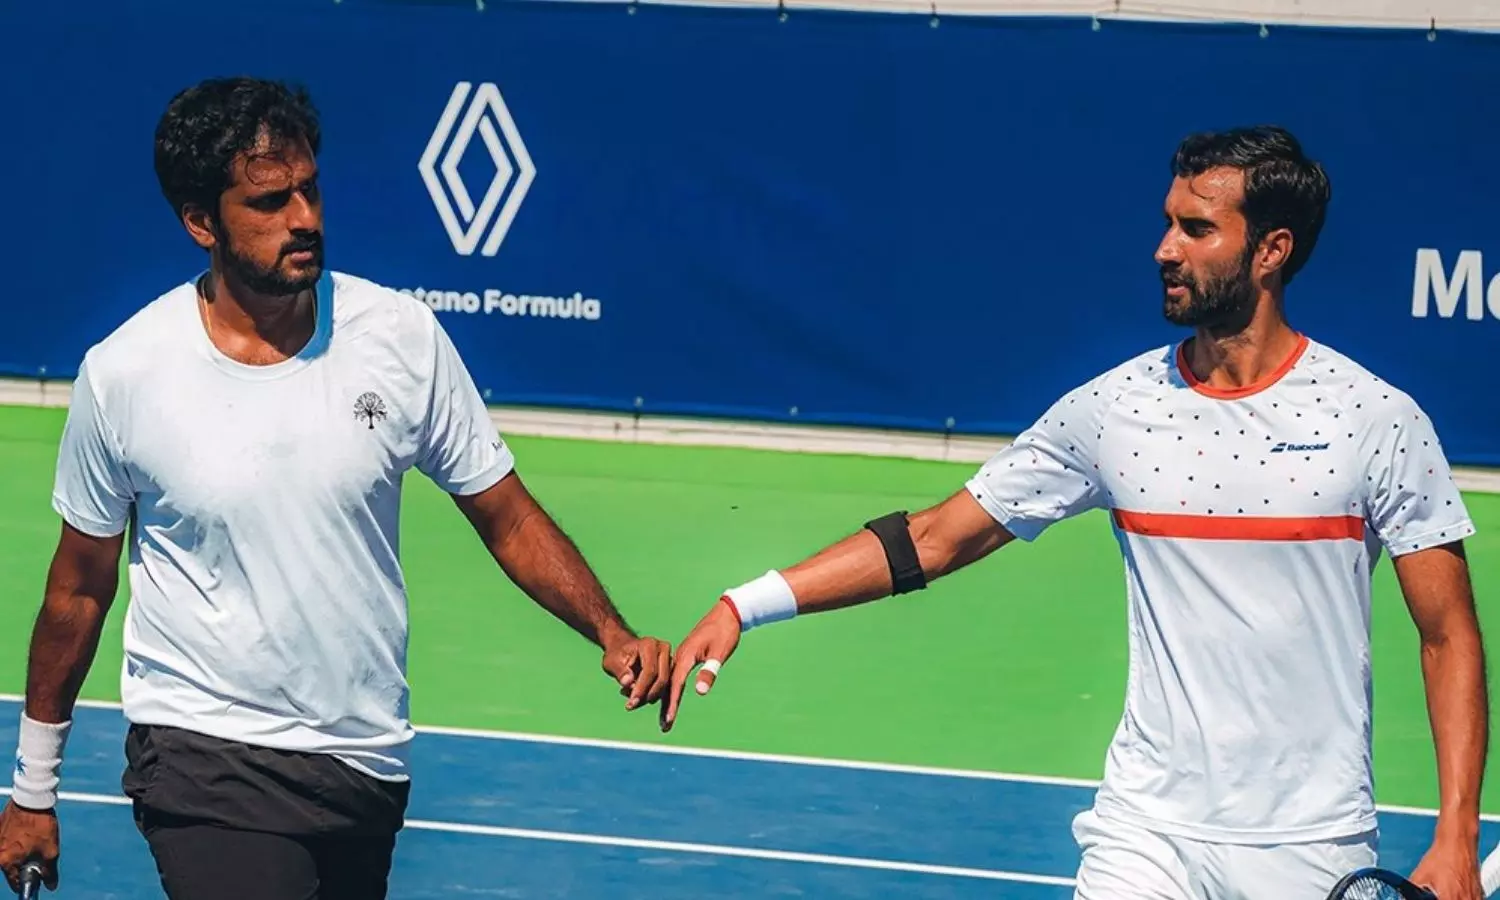 Davis Cup India vs Norway Day 2 LIVE- India loses 3-0 to Norway- Scores, Updates, Live Blog